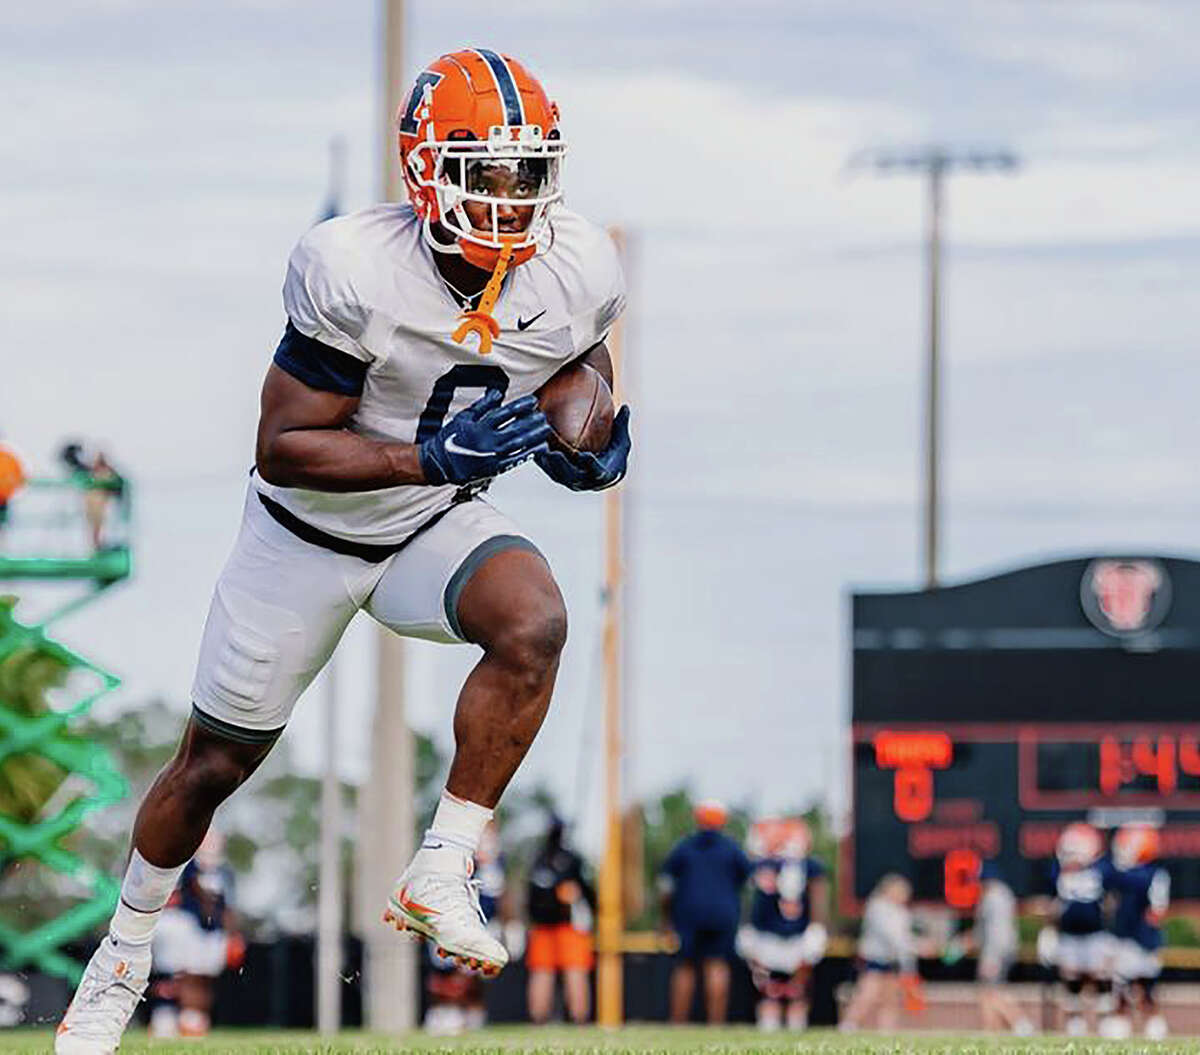 Illinois running back Josh McCray carries the ball during a team workout Saturday at the University of Tampa. The Illini are preparing to face Mississippi State on Monday in the Reliaquest Bowl in Tampa.